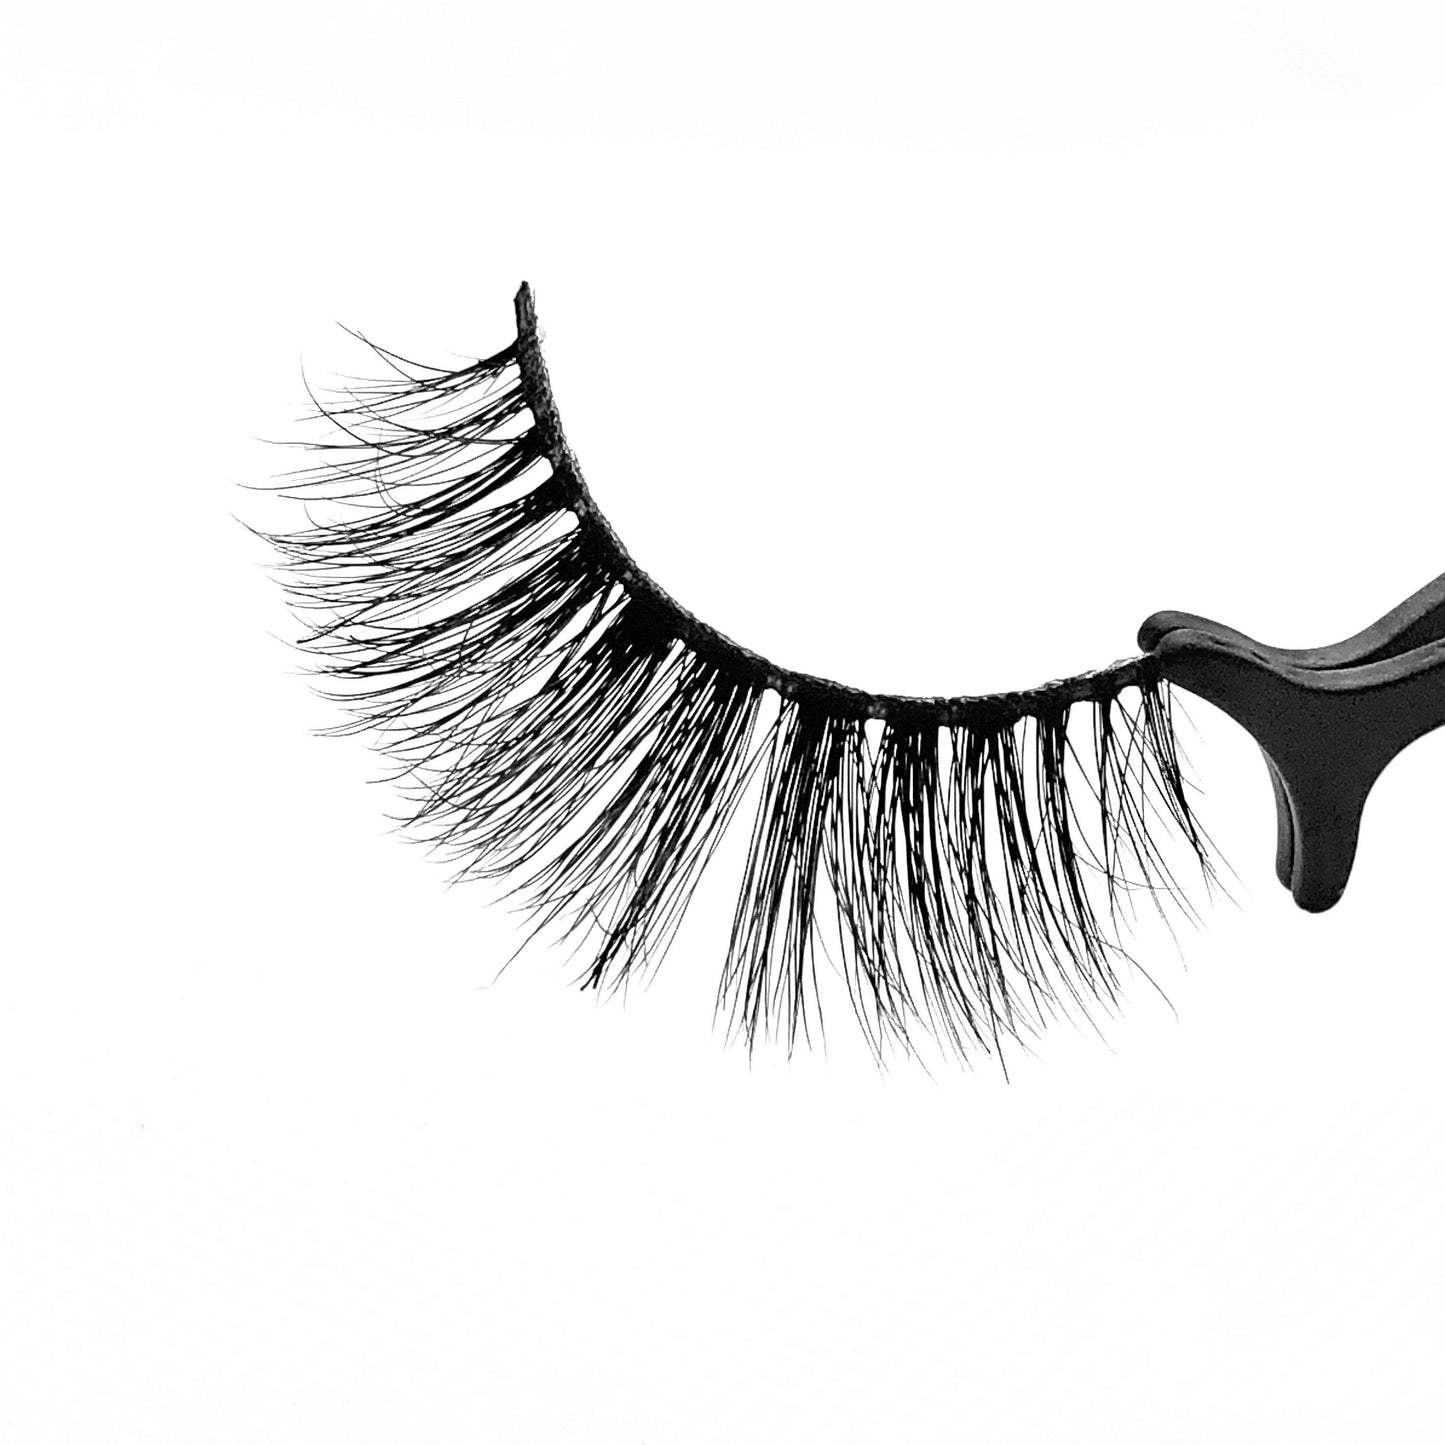 Jasmine-Medium Volume-Our 3D Mink Lashes in style “Jasmine” are a MUST HAVE. Grab a pair of "Jasmine" lashes to achieve a subtle, but “flirty” look. Whether it’s date night or a day out with the girls, these lashes are a staple to your beauty collection. They give you the perfect volume and suite most eye shapes. The longer hairs in the center create a beautiful effect to help bring out your eyes more. Also available in our "Best Sellers (3-Pack)" Description: Handmade, Cruelty-Free, Wear up to 